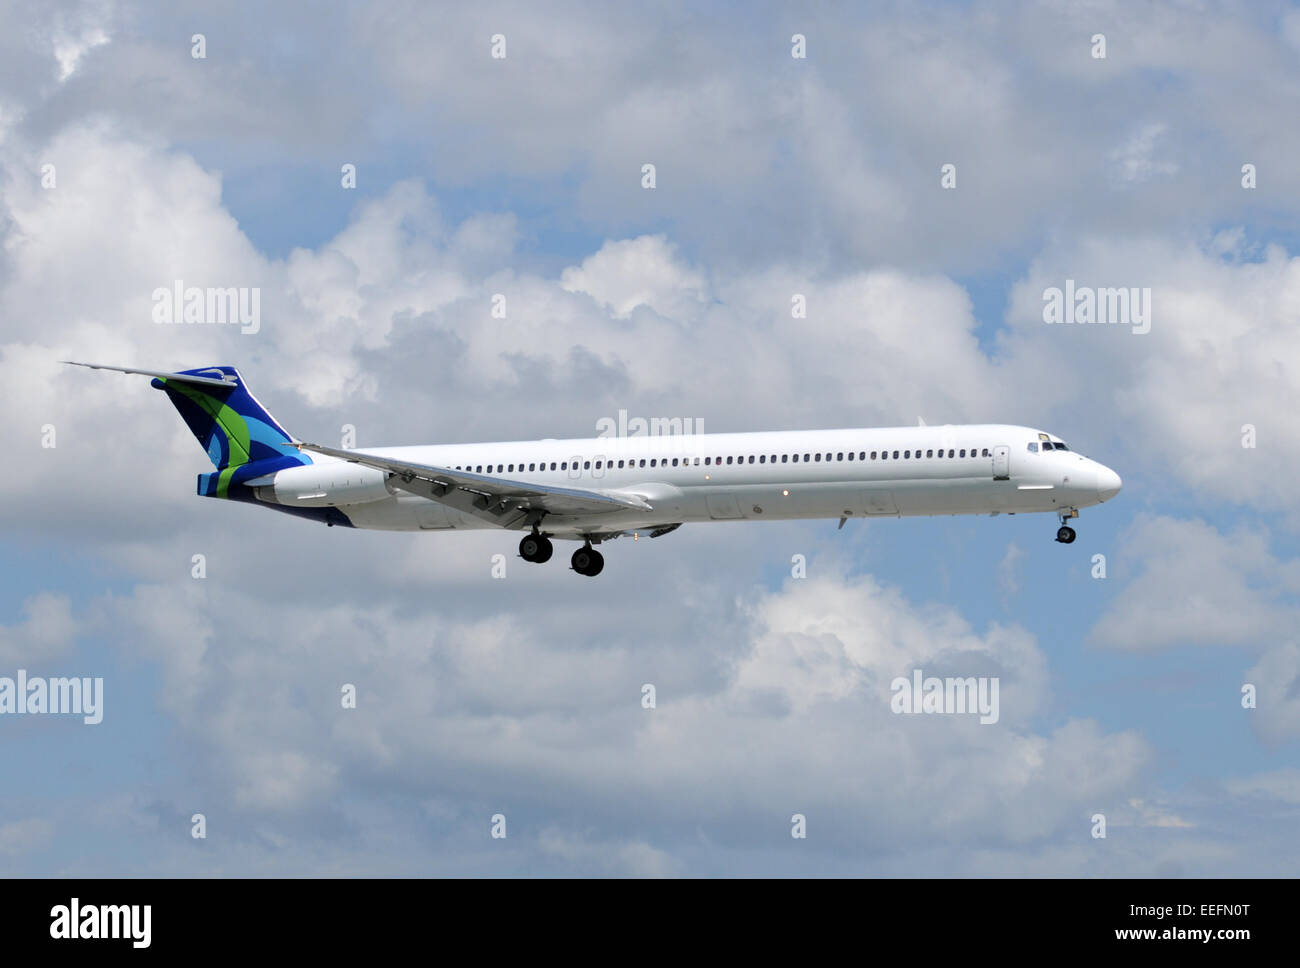 Passenger jet airplane in flight side view Stock Photo